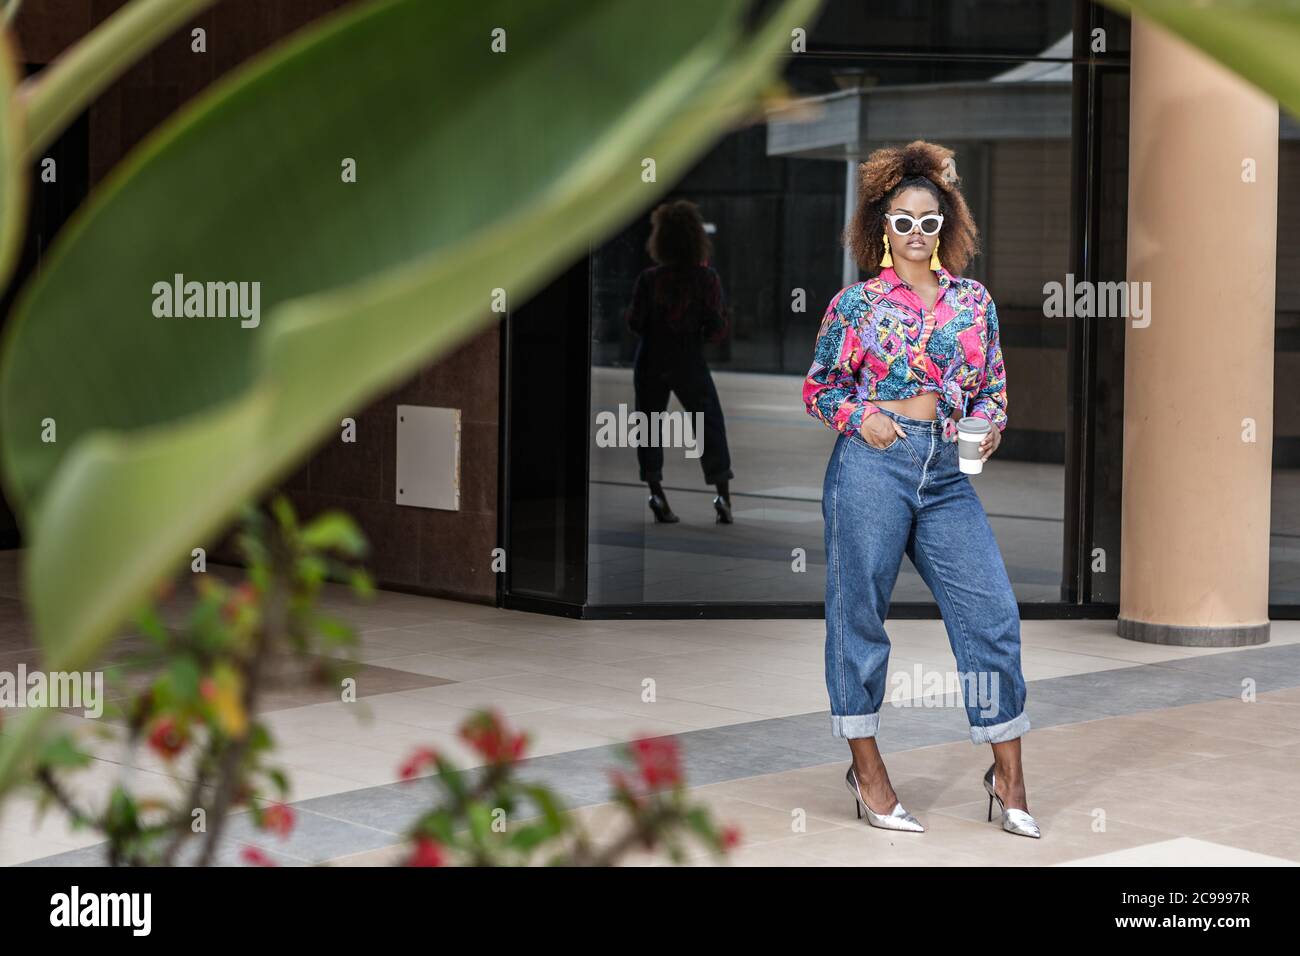 Full body of unemotional black female wearing fashionable clothes and sunglasses standing in city with take away coffee in reusable cup and looking at Stock Photo